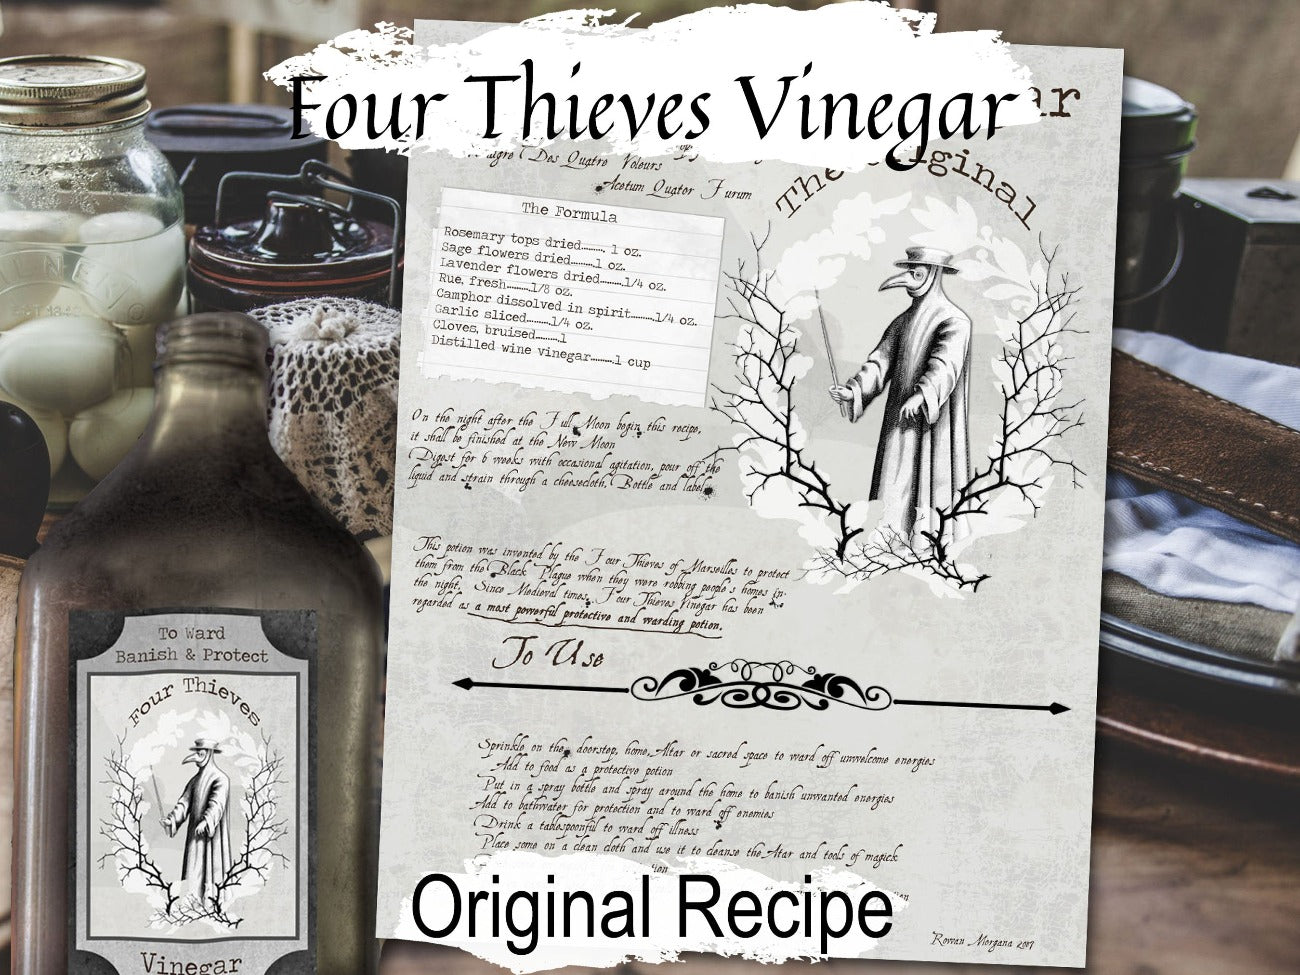 4 THIEVES VINEGAR, Traditional Witchcraft, Folk Magic, Original Vinegar Recipe, Kitchen Witch Herbal Apothecary, Banishing & Protection - Morgana Magick Spell